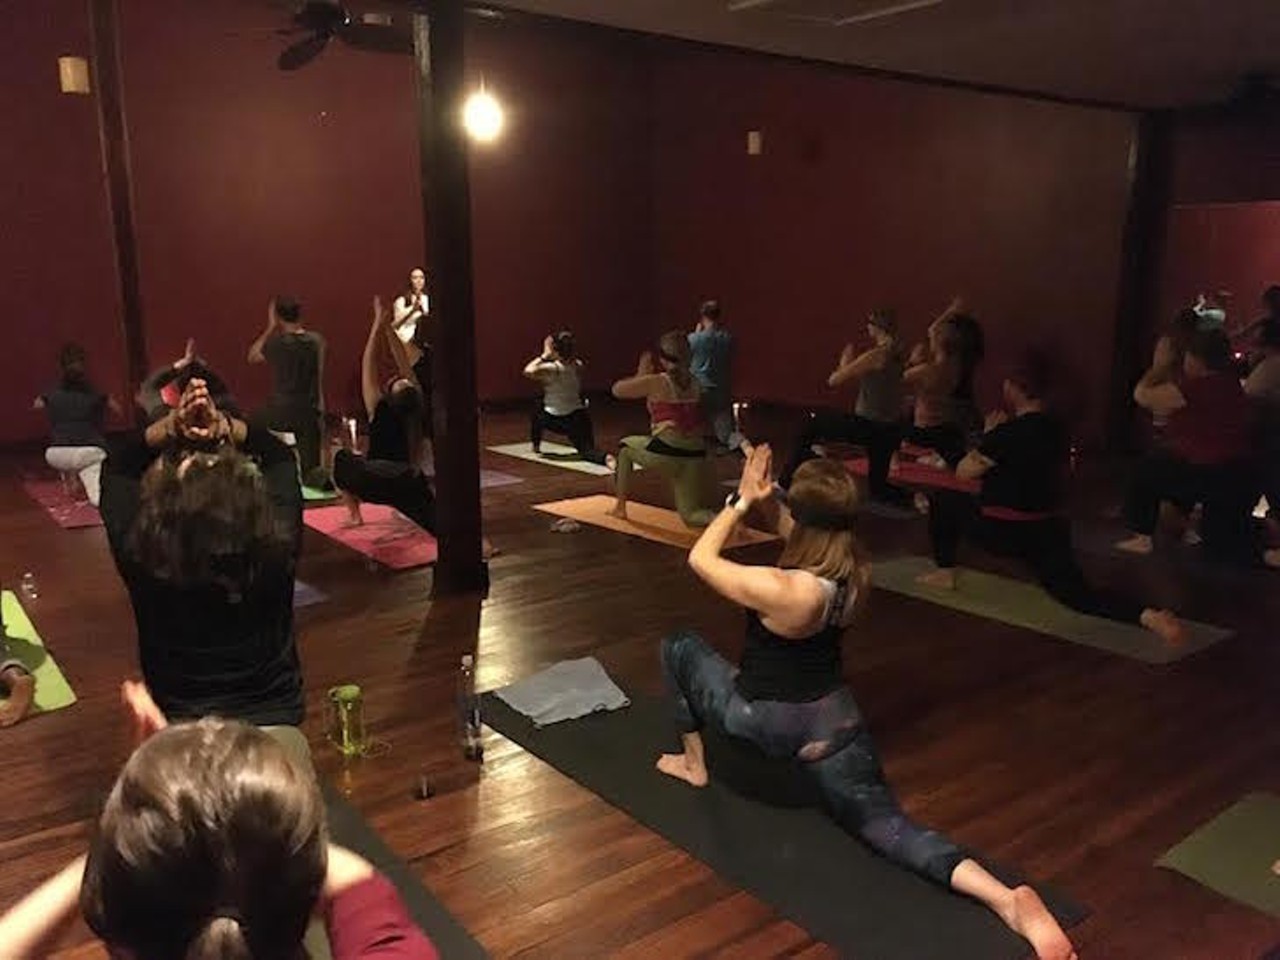  Total Harmony
555 W Bitters Rd, (210) 748-8247
It's all in the name with this place. Total Harmony offers gentle and restorative, pre-natal and advanced classes, so there's something there for everyone. 